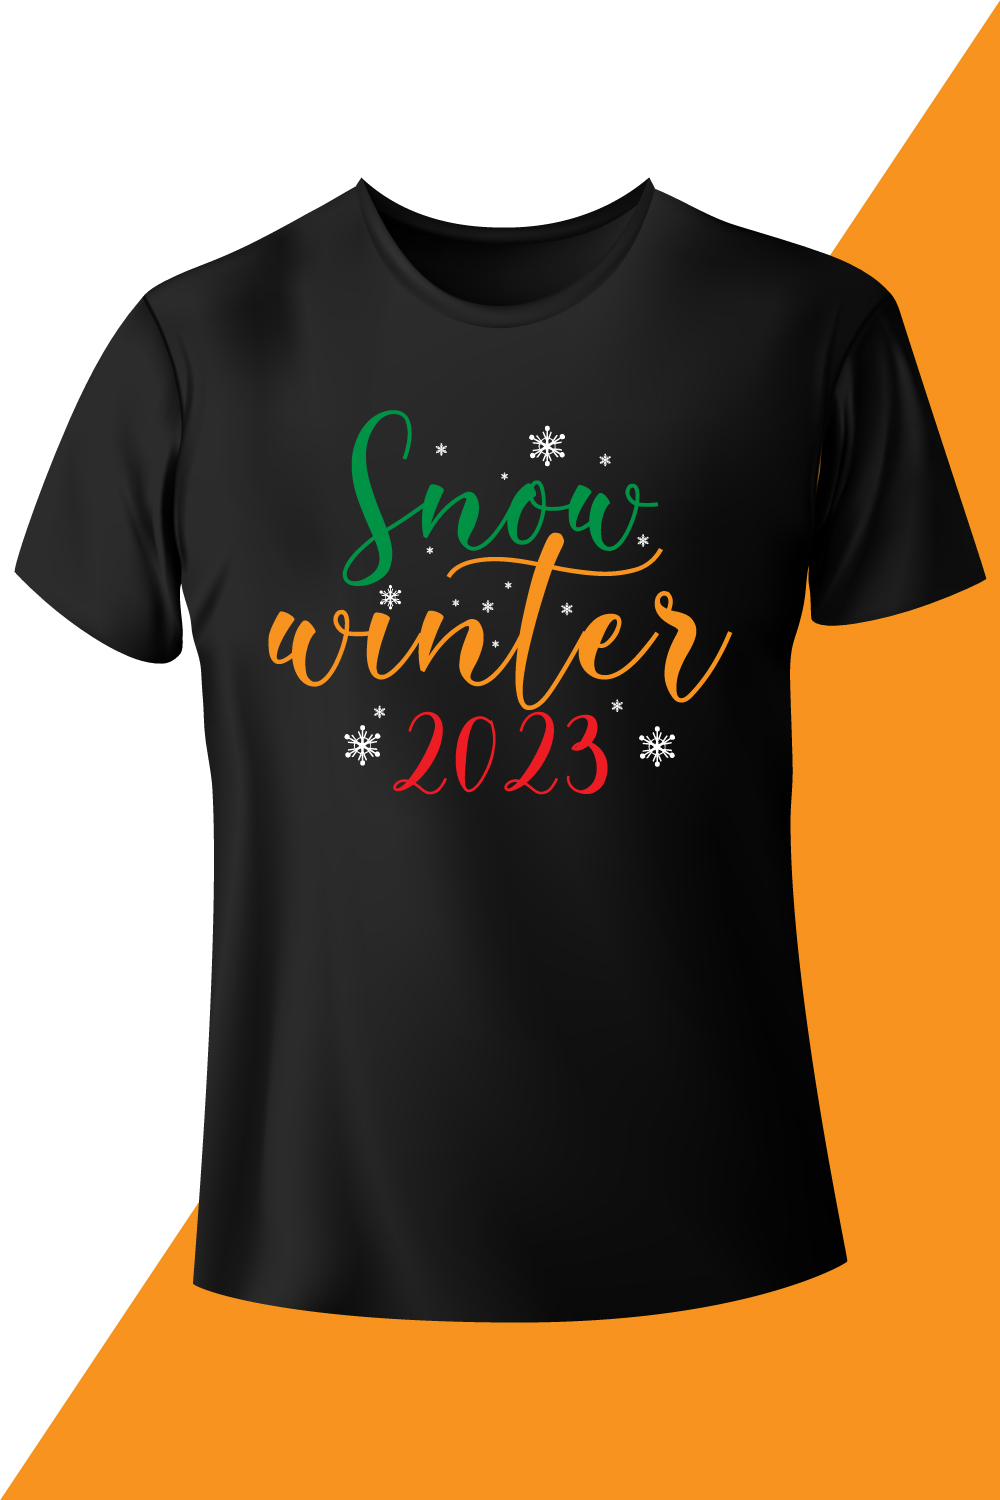 Image of black t-shirt with charming print Snow Winter 2023.